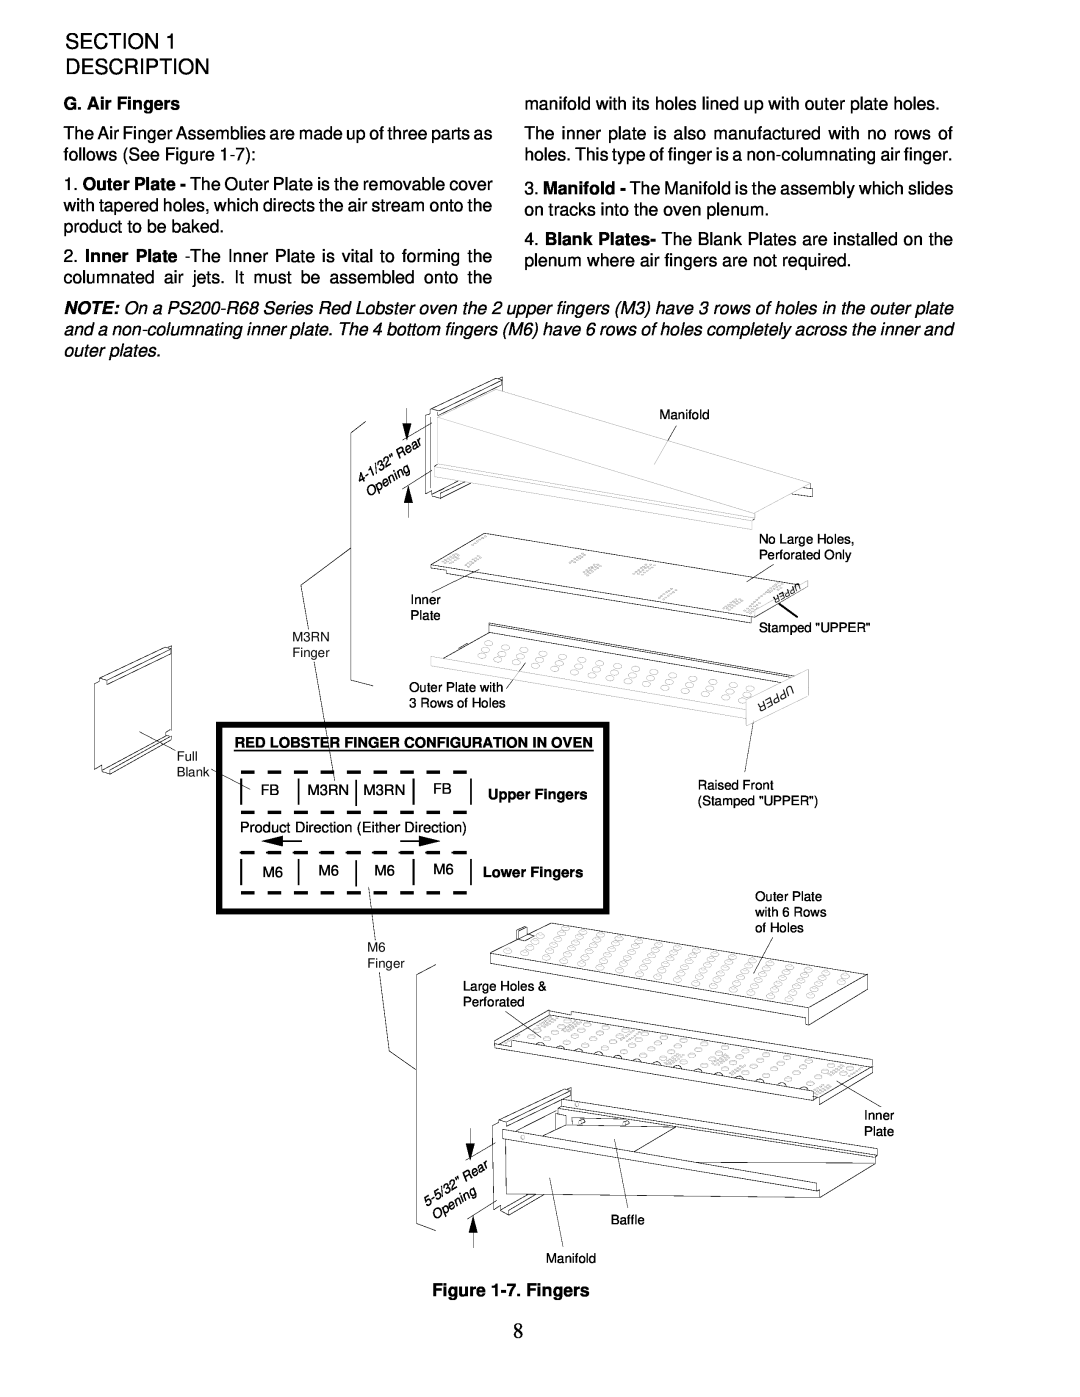 Middleby Cooking Systems Group PS200-R68 manual G. Air Fingers, 7. Fingers, Section Description 